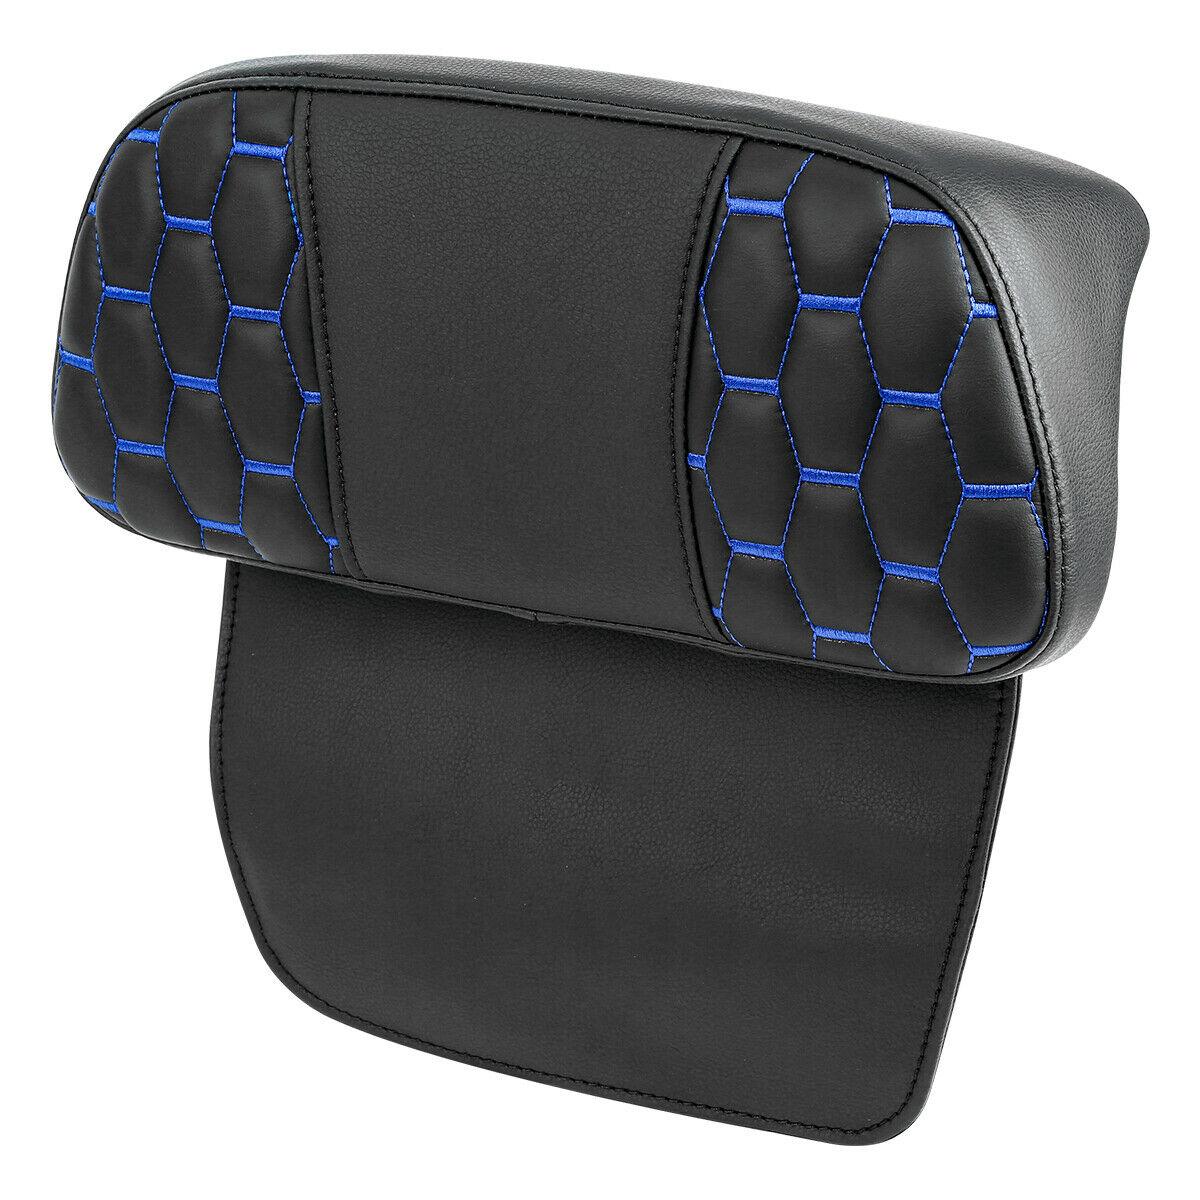 Passenger Pak Trunk Backrest Pad Fit For Harley Touring Road Glide King 2014-Up - Moto Life Products